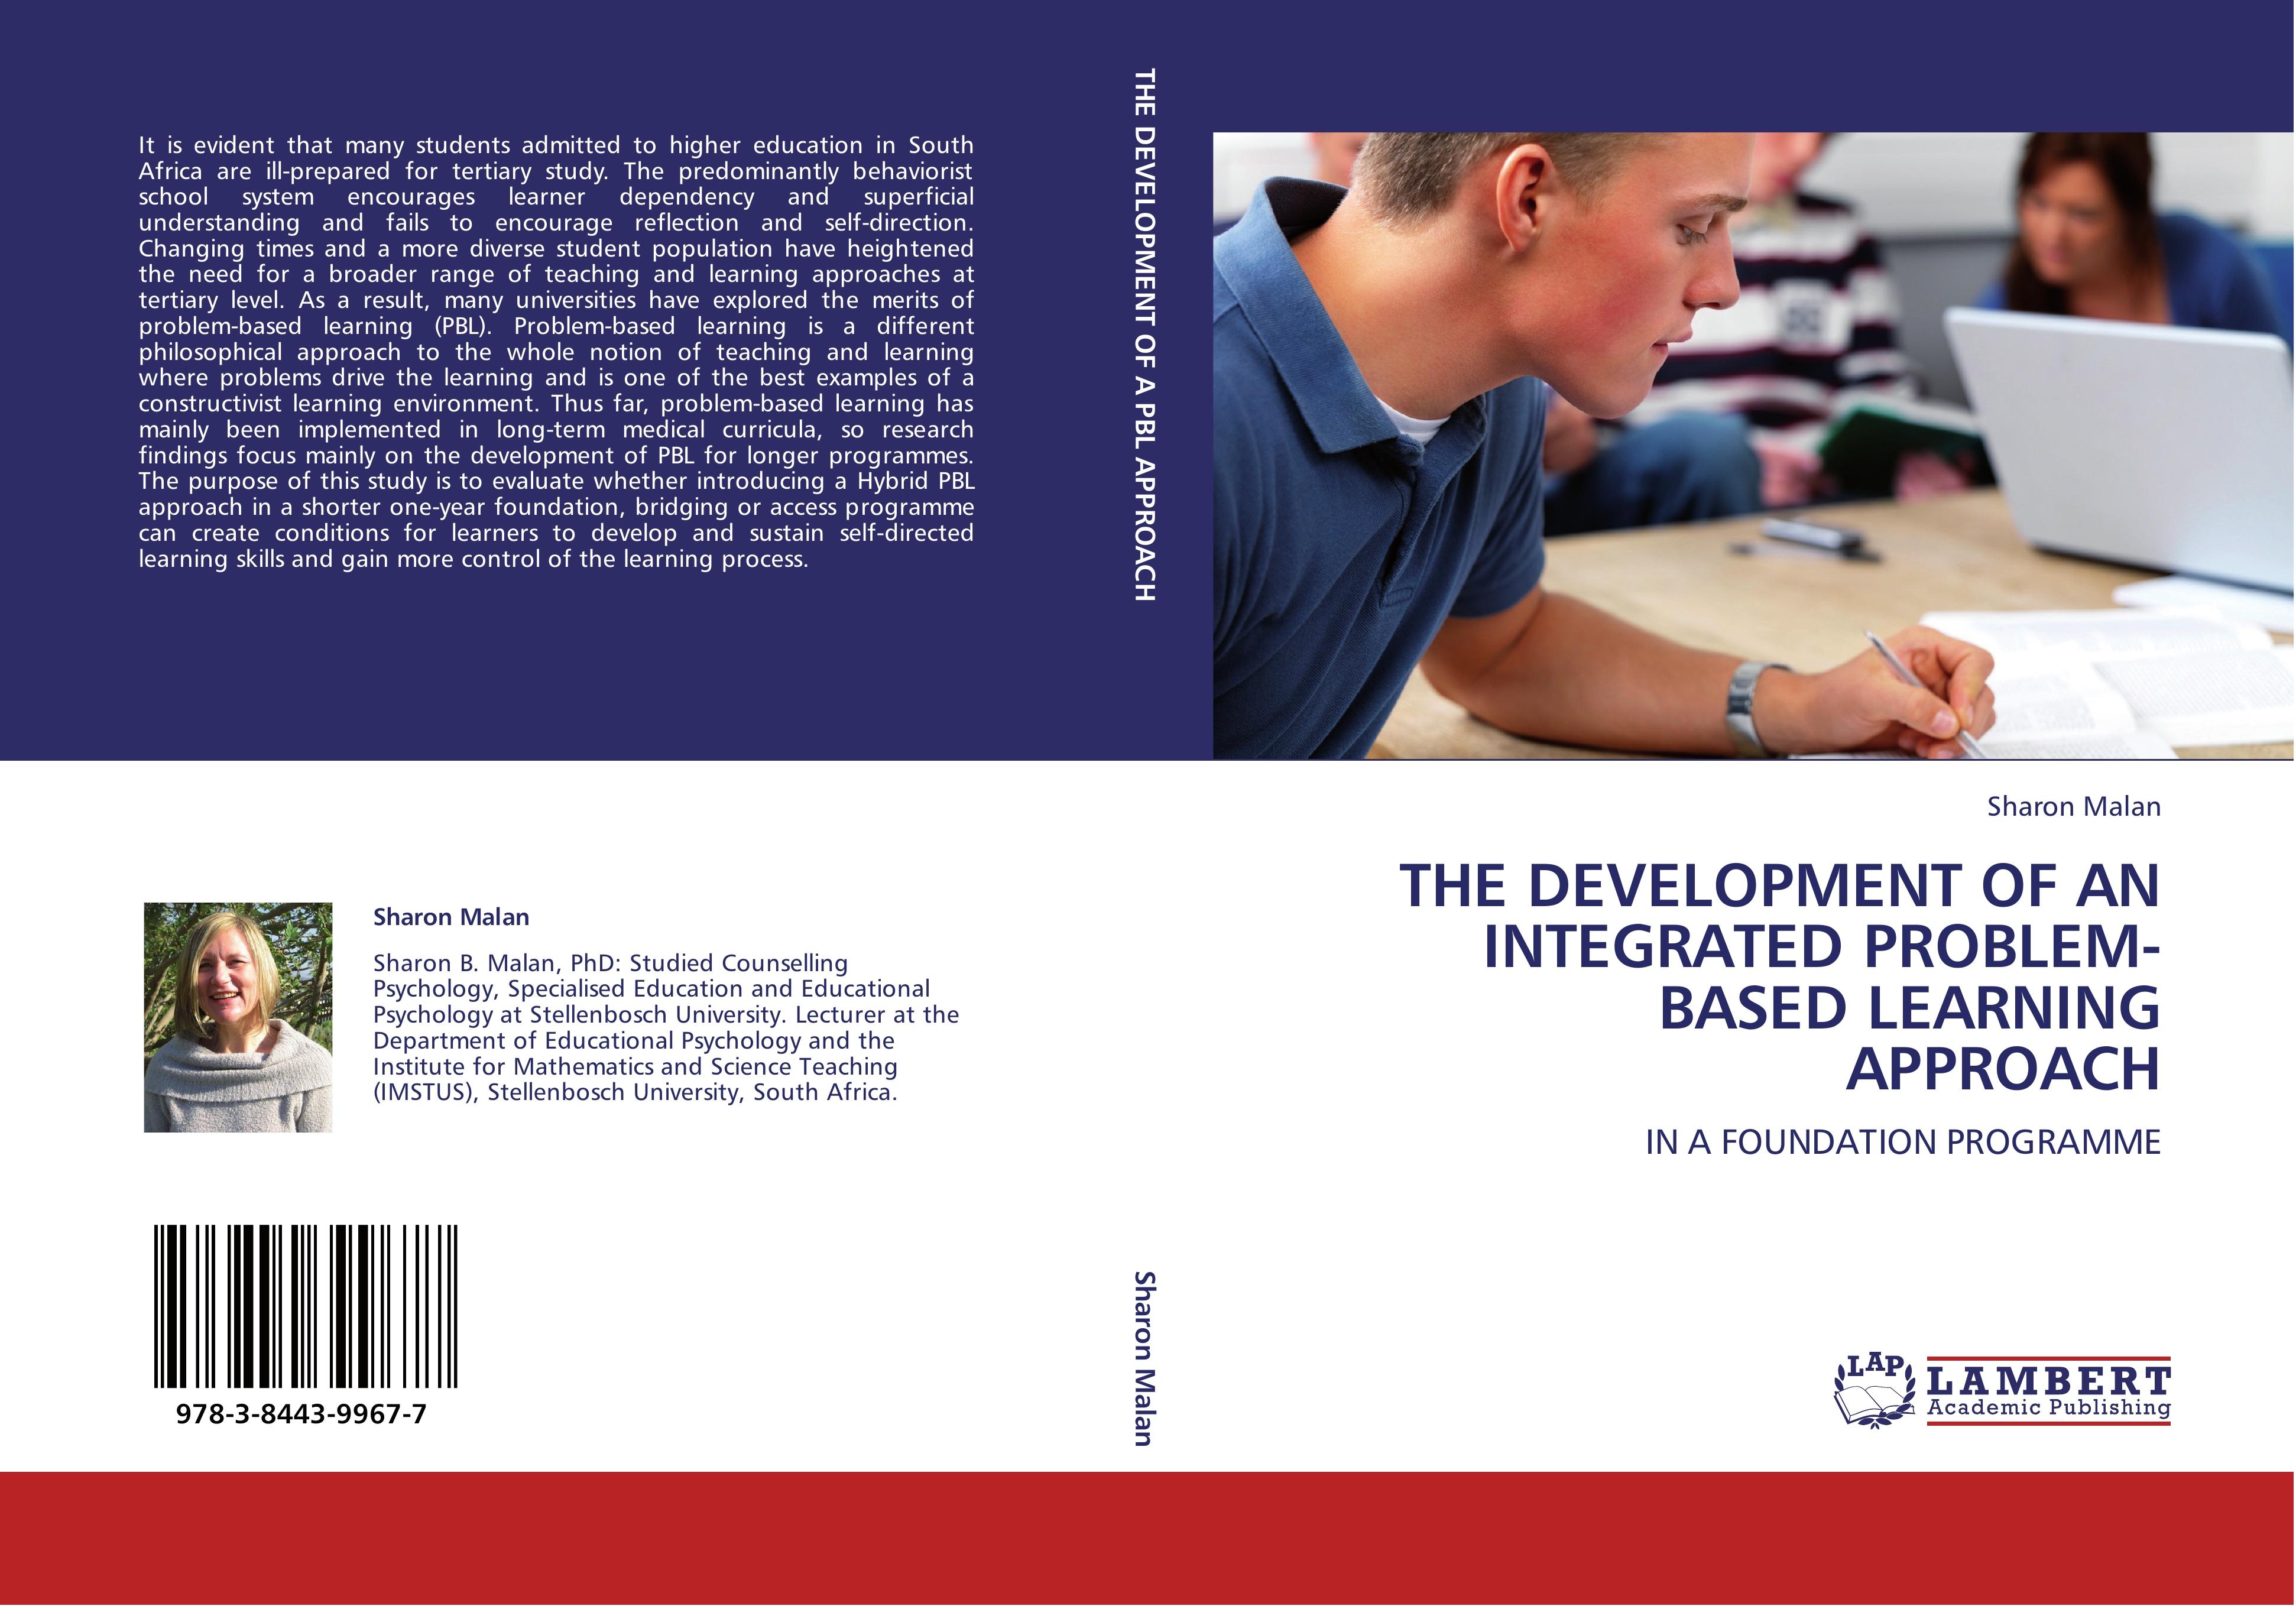 THE DEVELOPMENT OF AN INTEGRATED PROBLEM-BASED LEARNING APPROACH - Sharon Malan